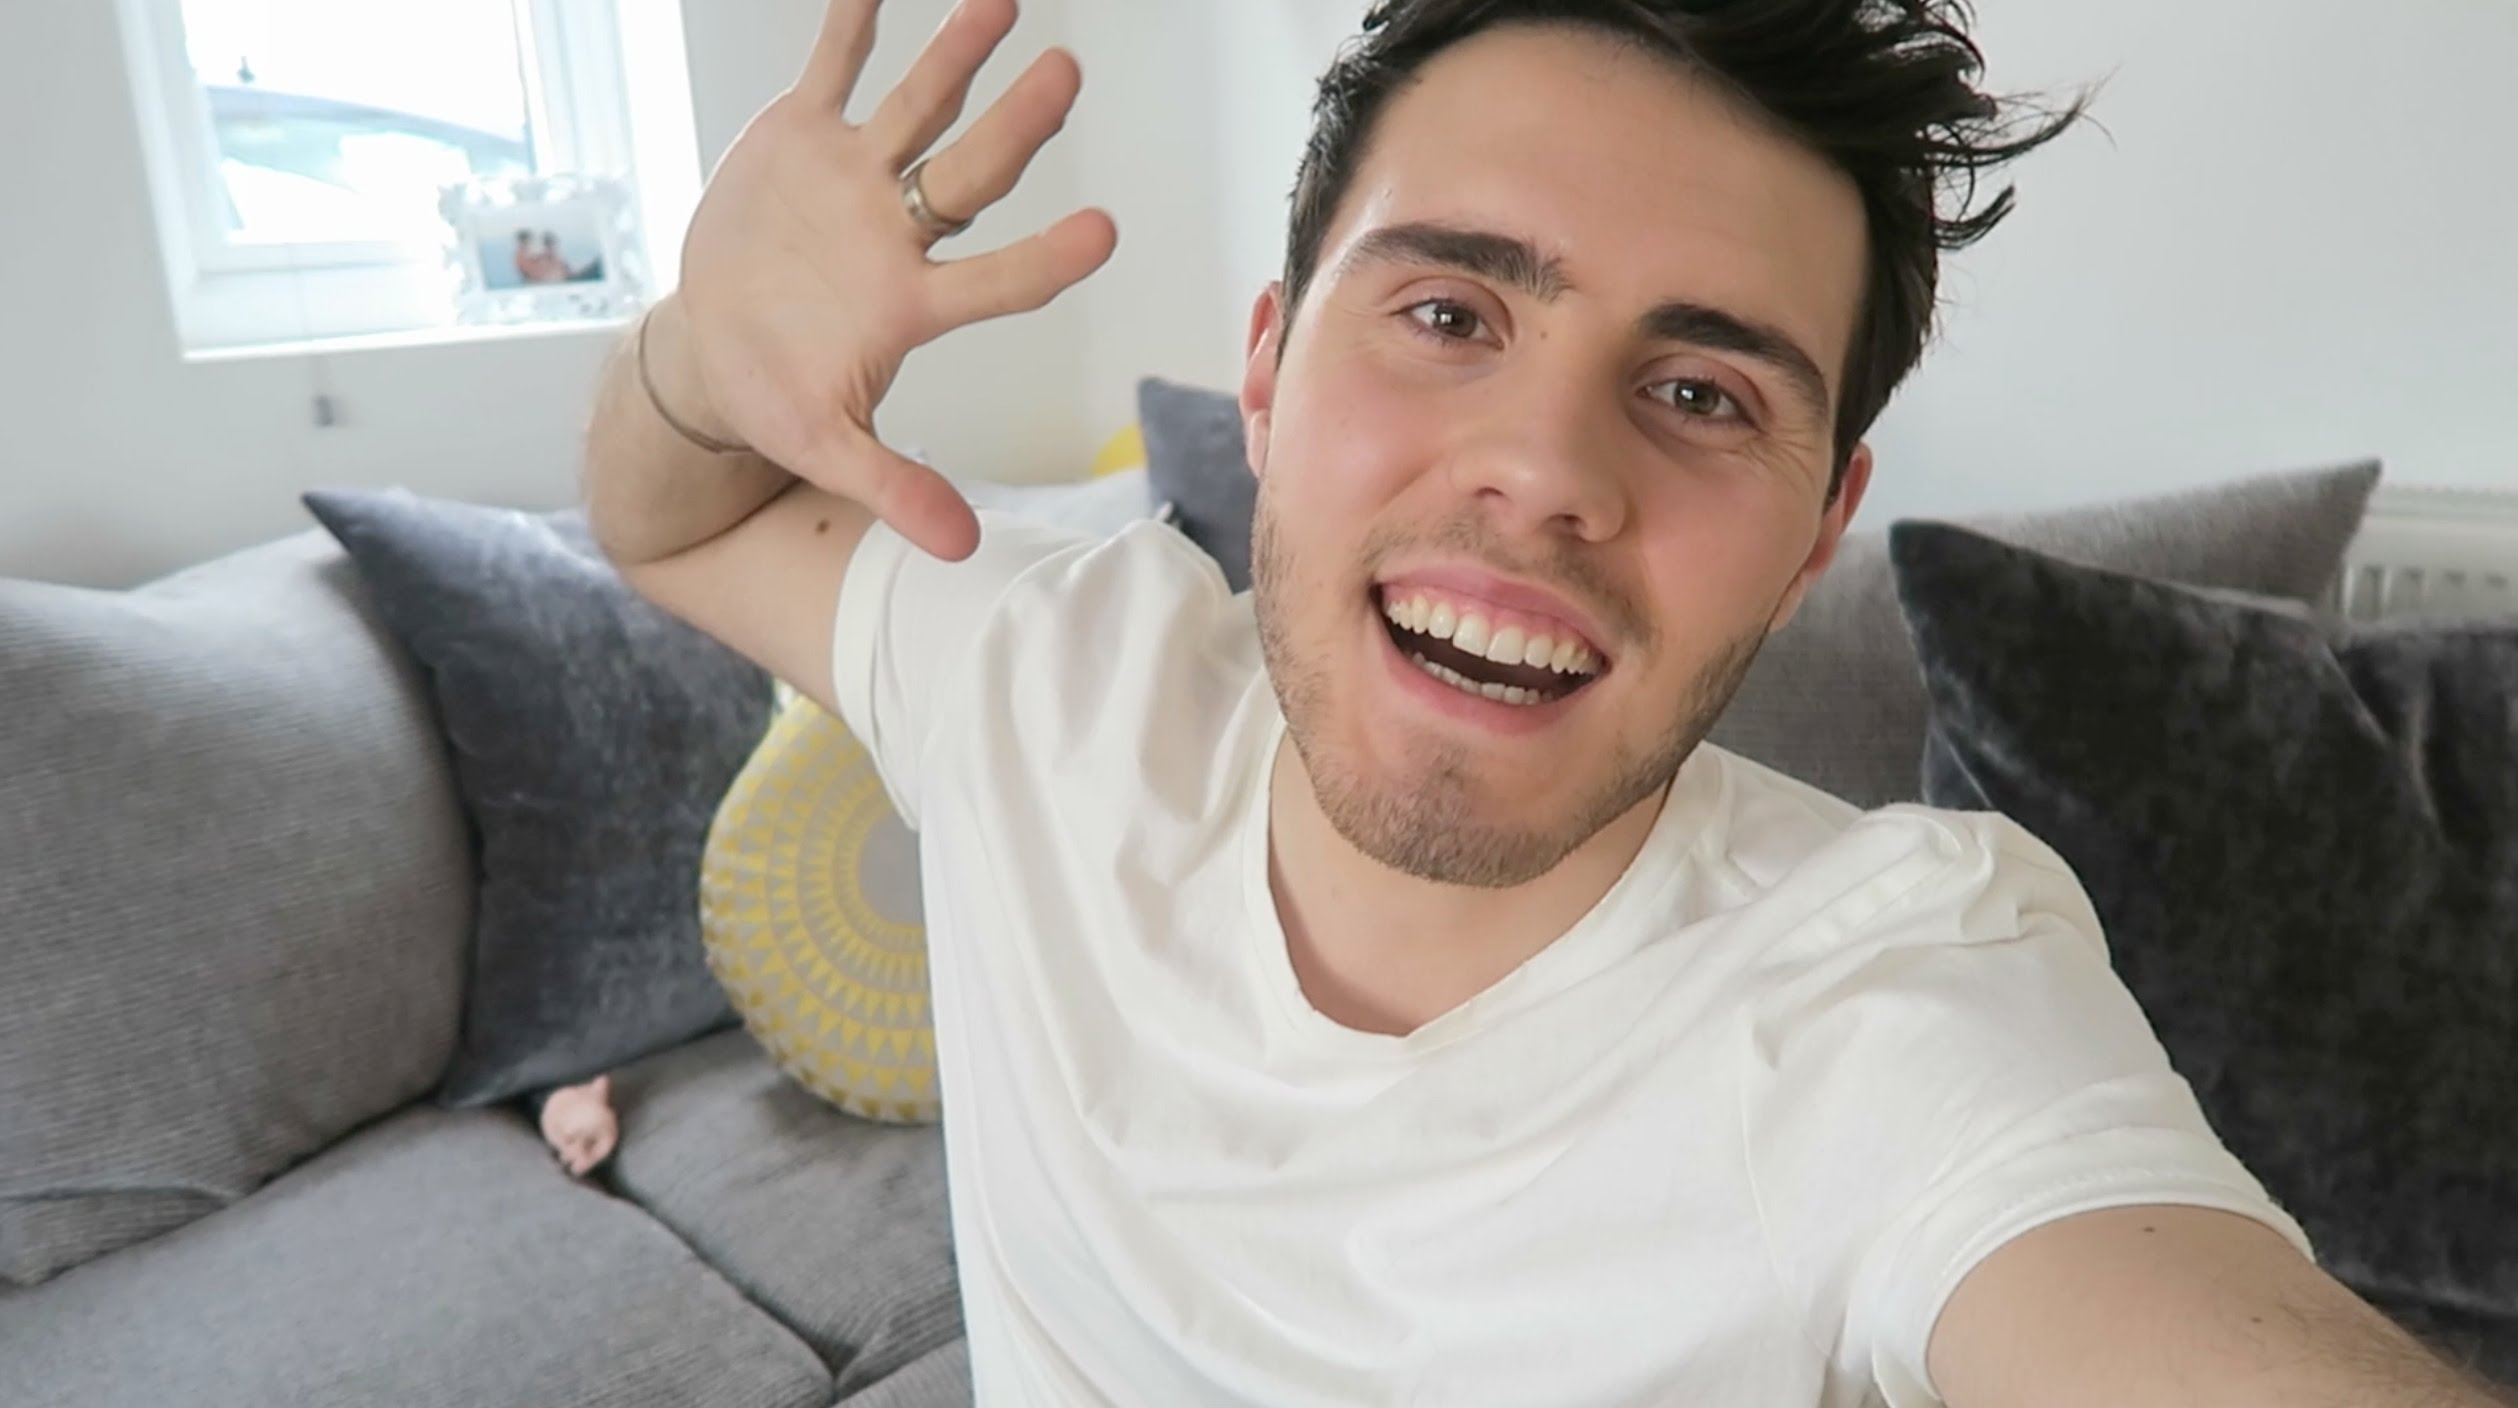 Alfie Deyes - aka Pointless Blog - is a daily vlogger with a love for all things technology, gaming and having fun